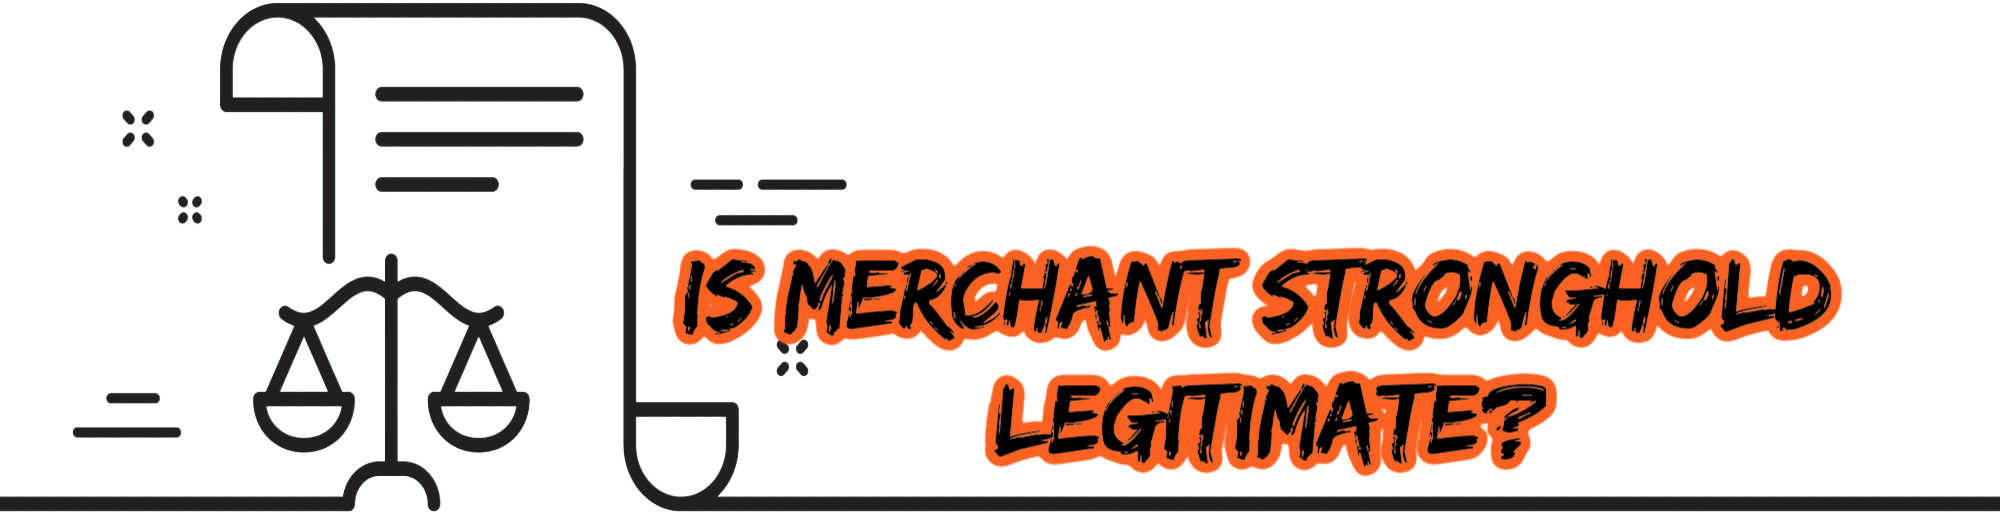 image of is merchant stronghold legitimate